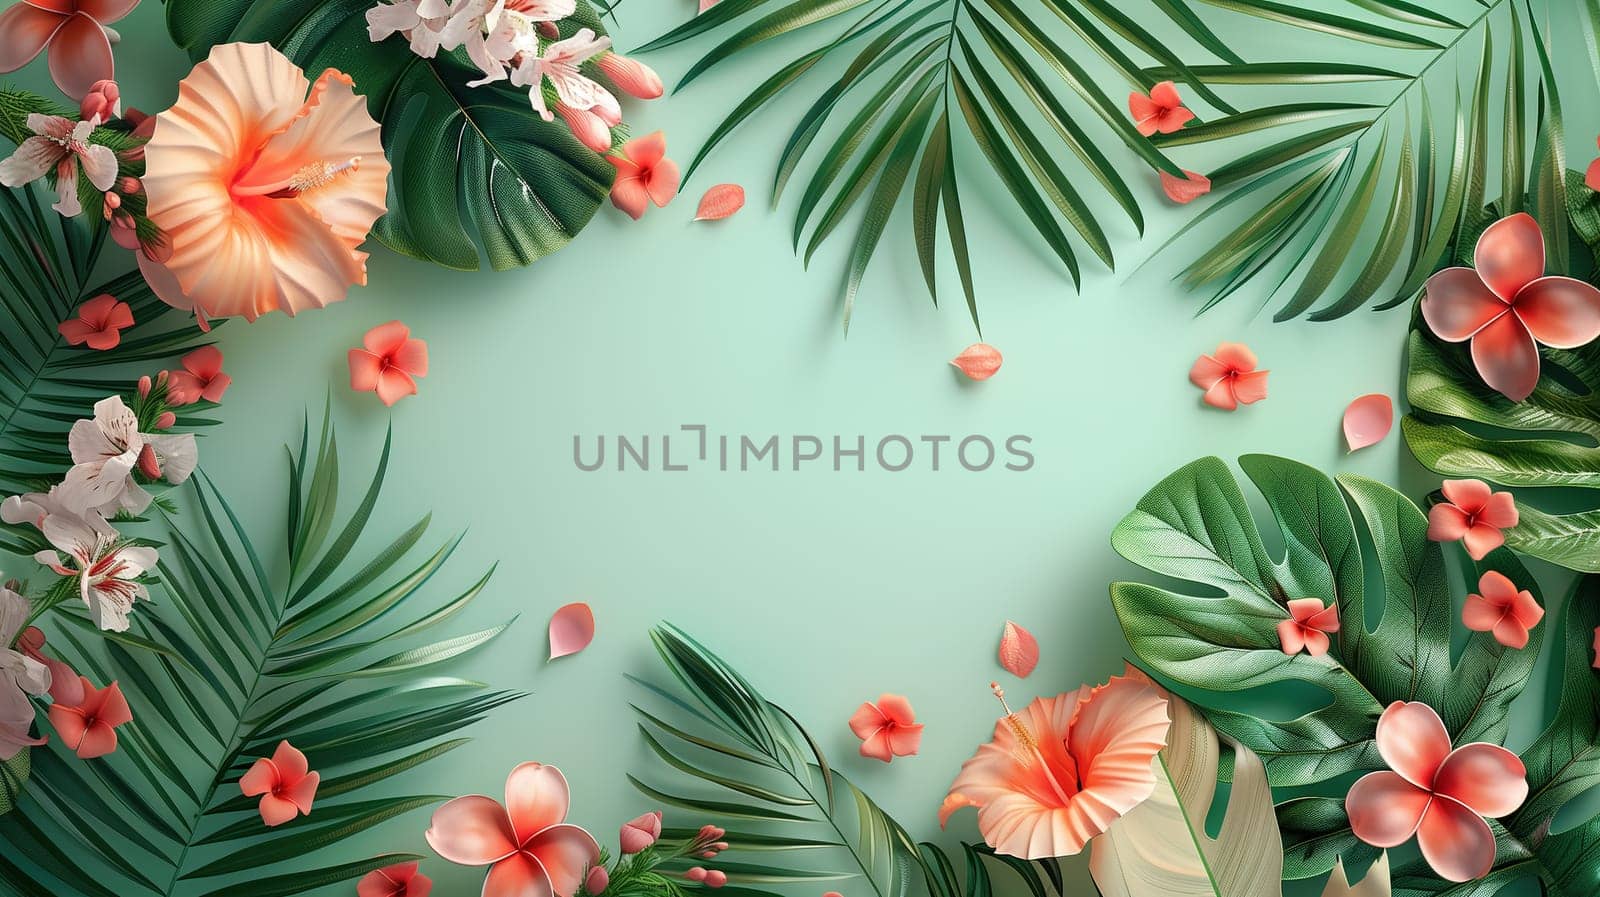 Lush green foliage fills the background, adorned with vibrant flowers and delicate leaves. The flowers bloom in various colors, adding a pop of brightness to the scene.